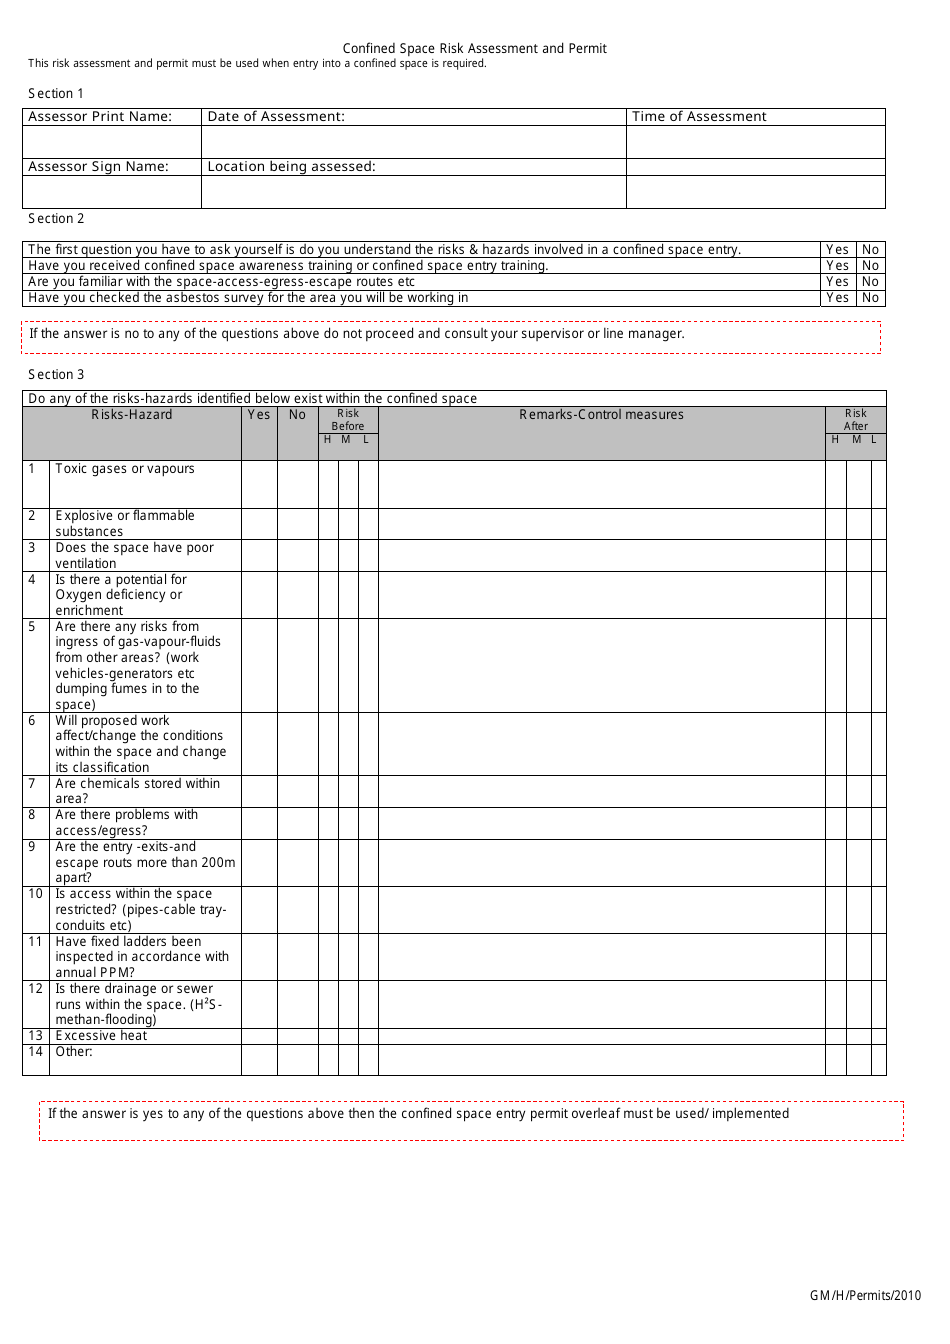 Confined Space Risk Assessment and Permit Form, Page 1